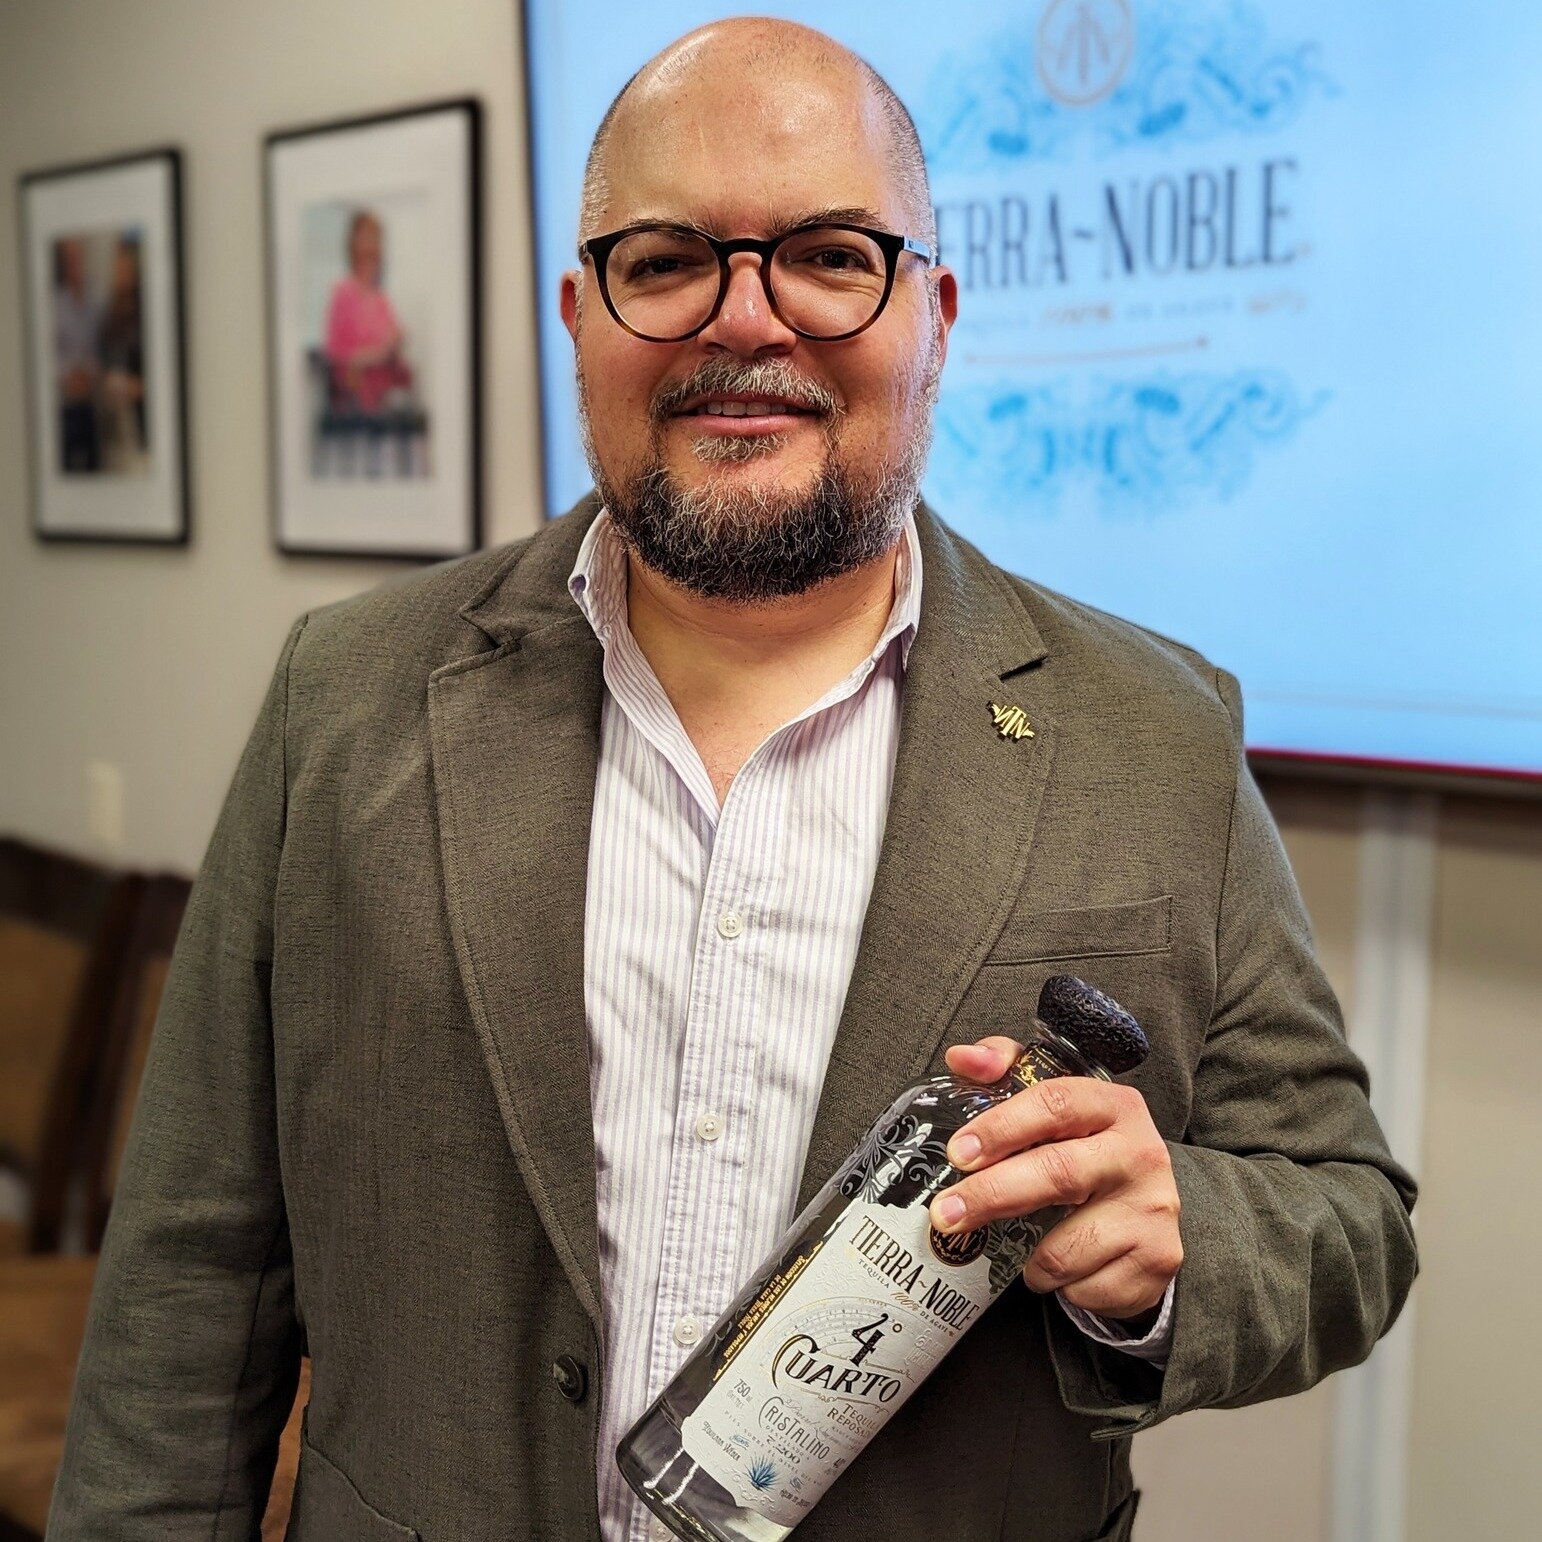 Alberto Herrera, master distiller at Tierra Noble, visited MISA HQ today to lead us through a tasting of six different styles of their tequila and educate us on the amazing process behind distilling agave. Tierra Noble creates 100% additive-free tequ